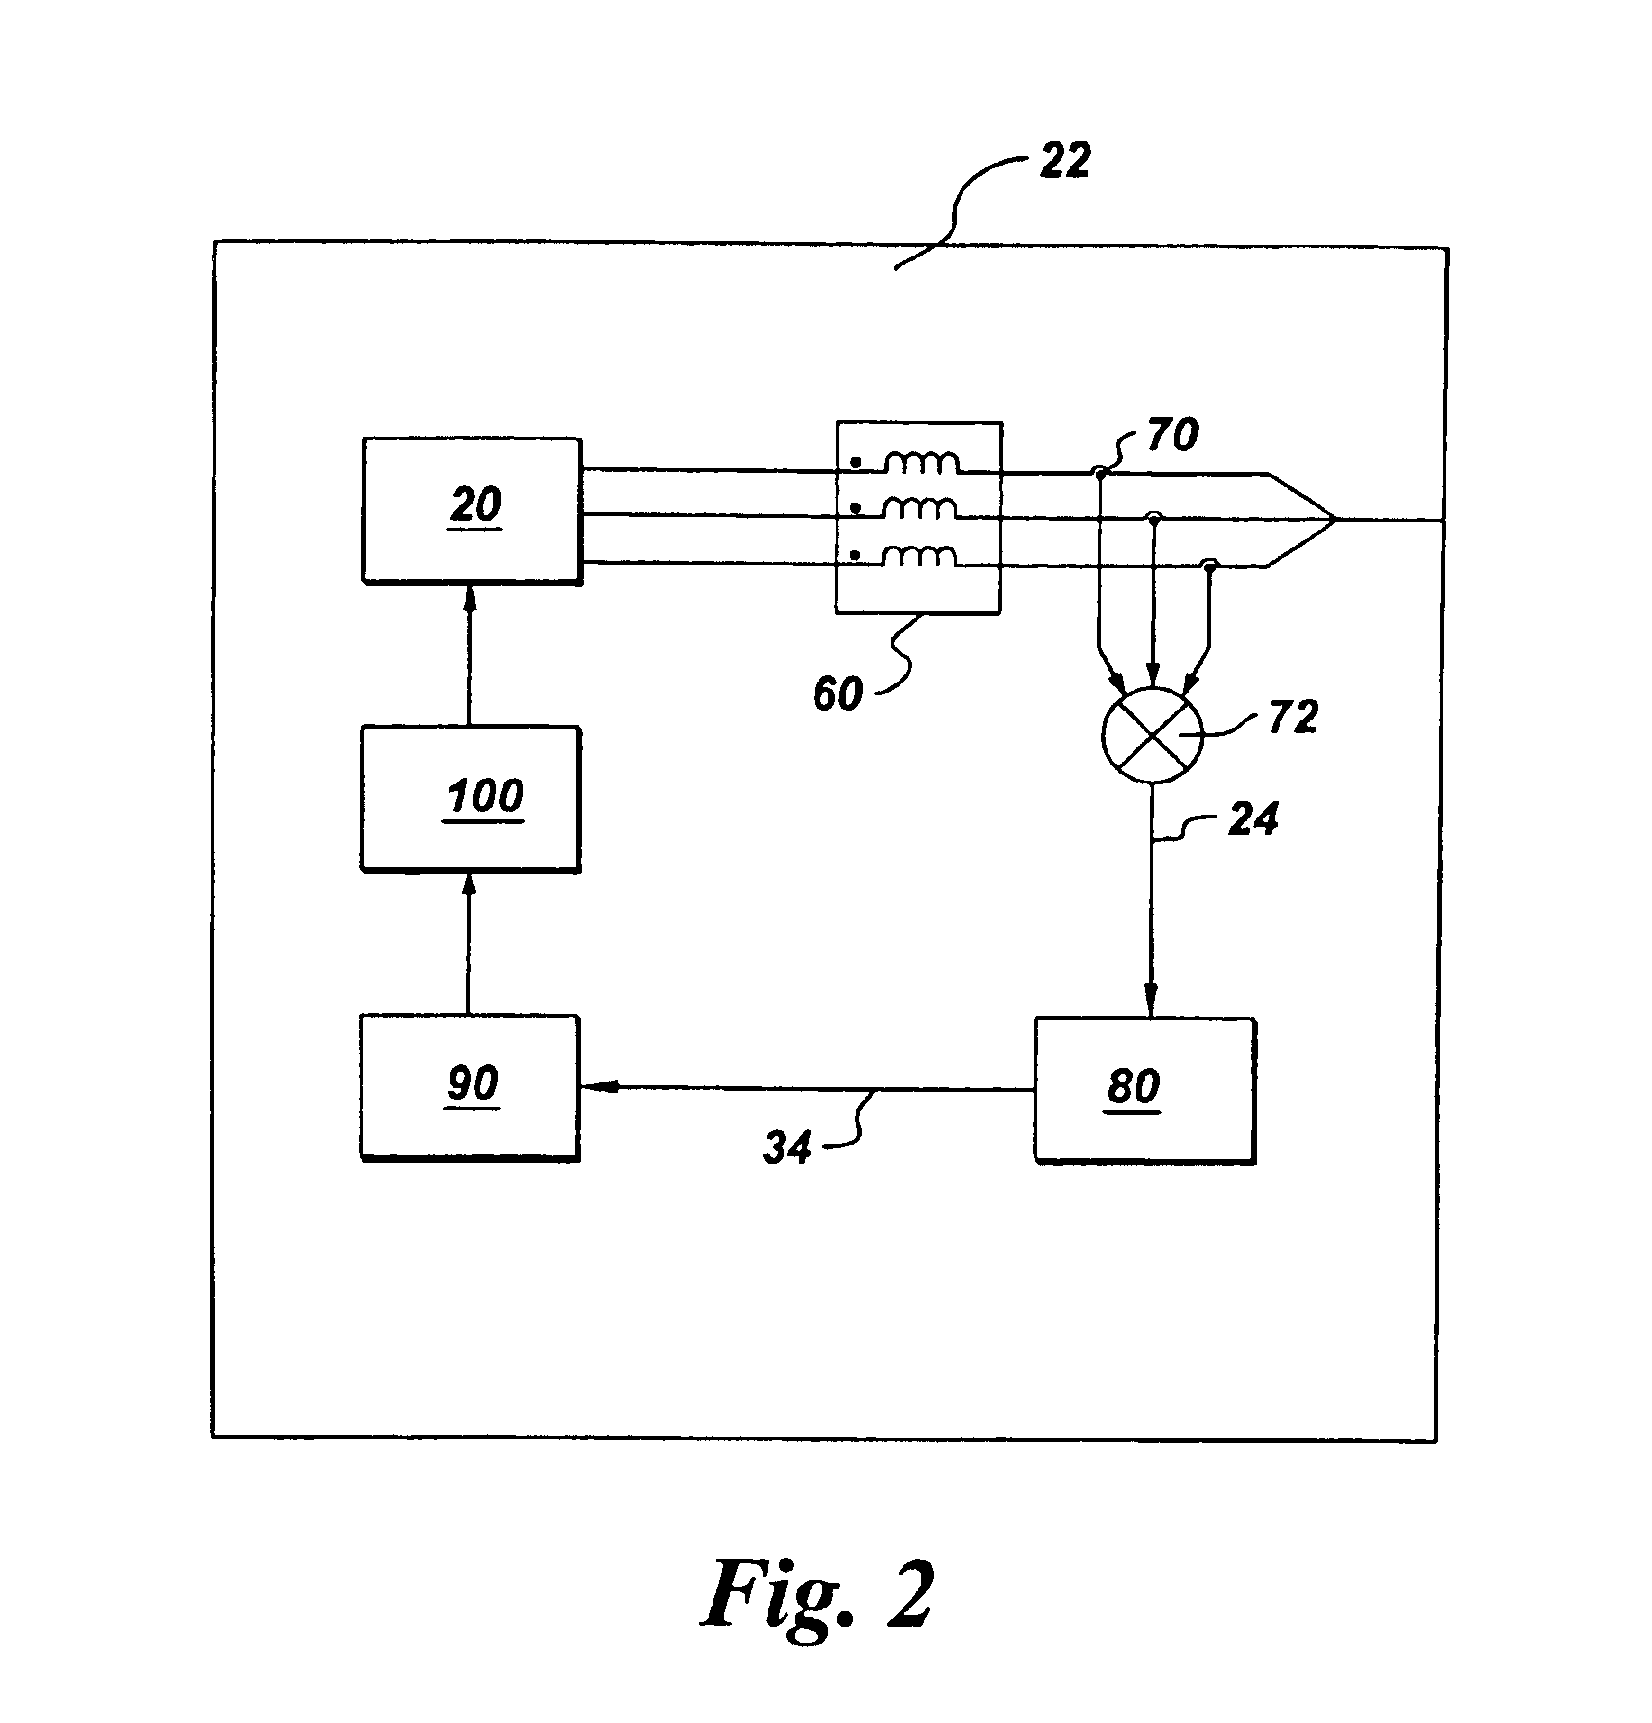 Cross current control for power converter systems and integrated magnetic choke assembly